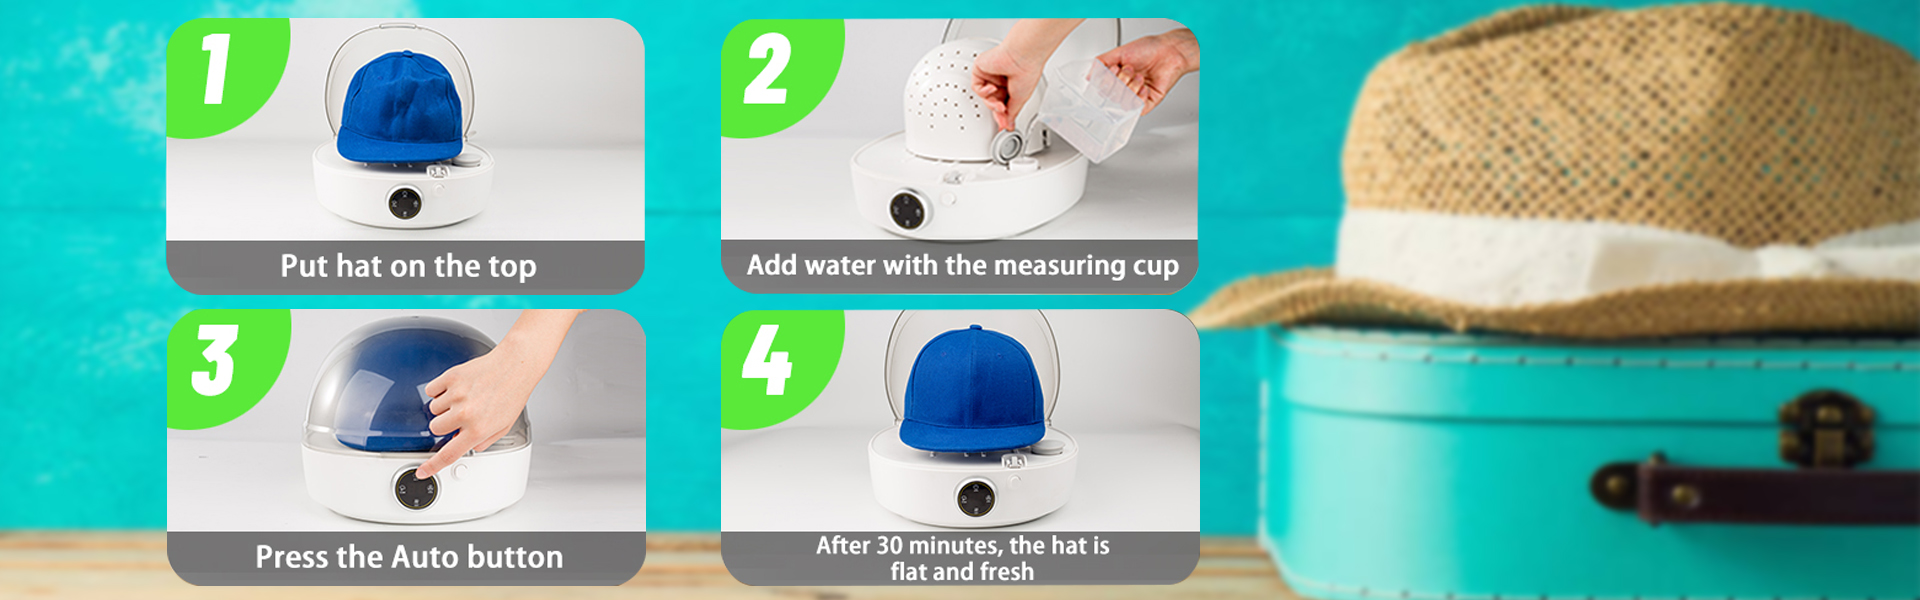 Hat Care Machine for Iron and Dry,Restore Misshapen Hat/Cap Natural Shape  with Steam and Hot&Cold Wind,Keep Your Hat/Cap Clean and Shaped